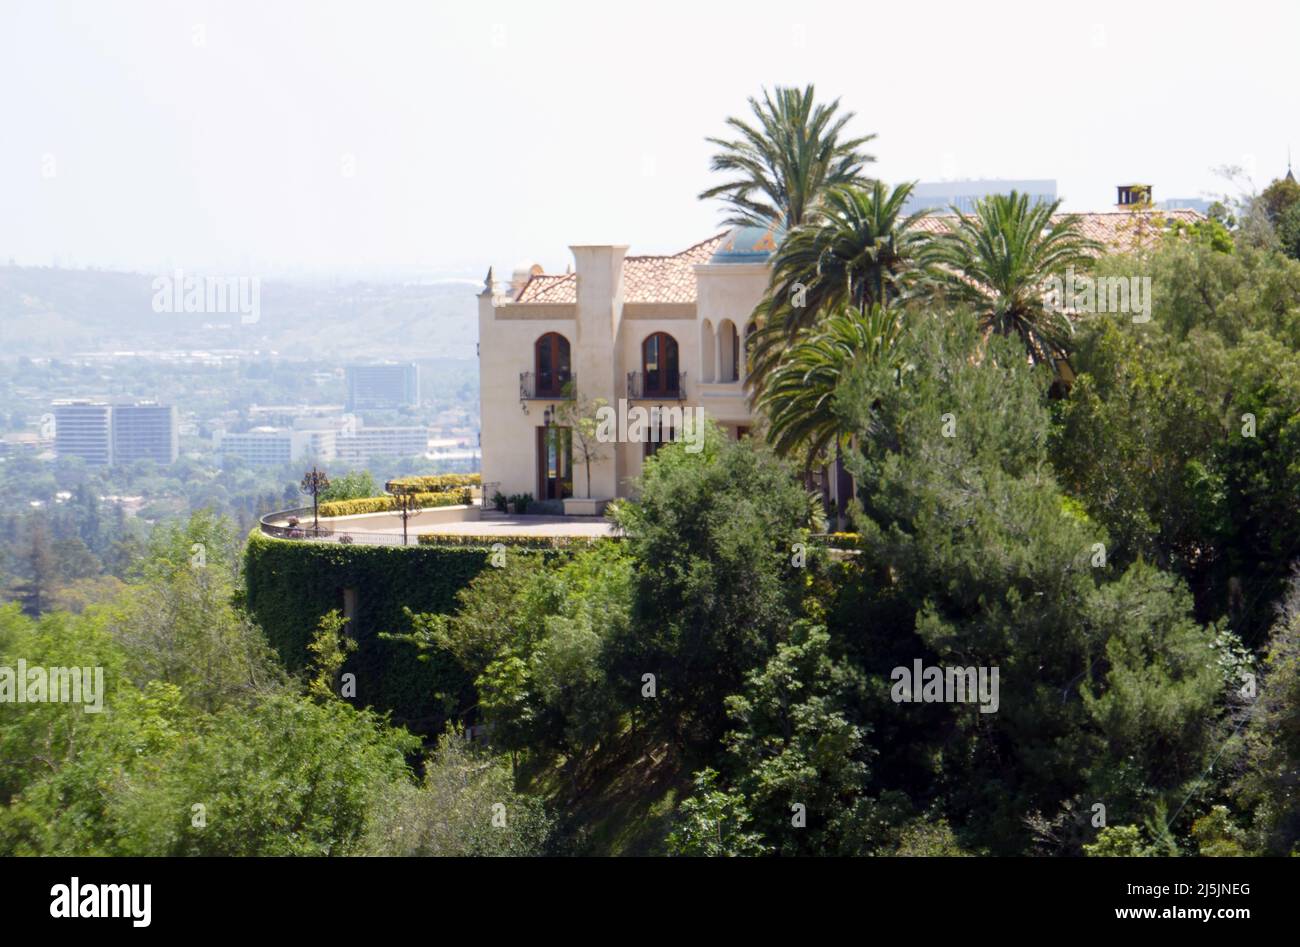 Beverly Hills, California, USA 17th April 2022 A general view of atmosphere of Former Sharon Tate House where Manson Family Murders occurred previously at 10050 Cielo Drive, now 10066 Cielo Drive on April 17, 2022 in Beverly Hills, California, USA. Photo by Barry King/Alamy Stock Photo Stock Photo